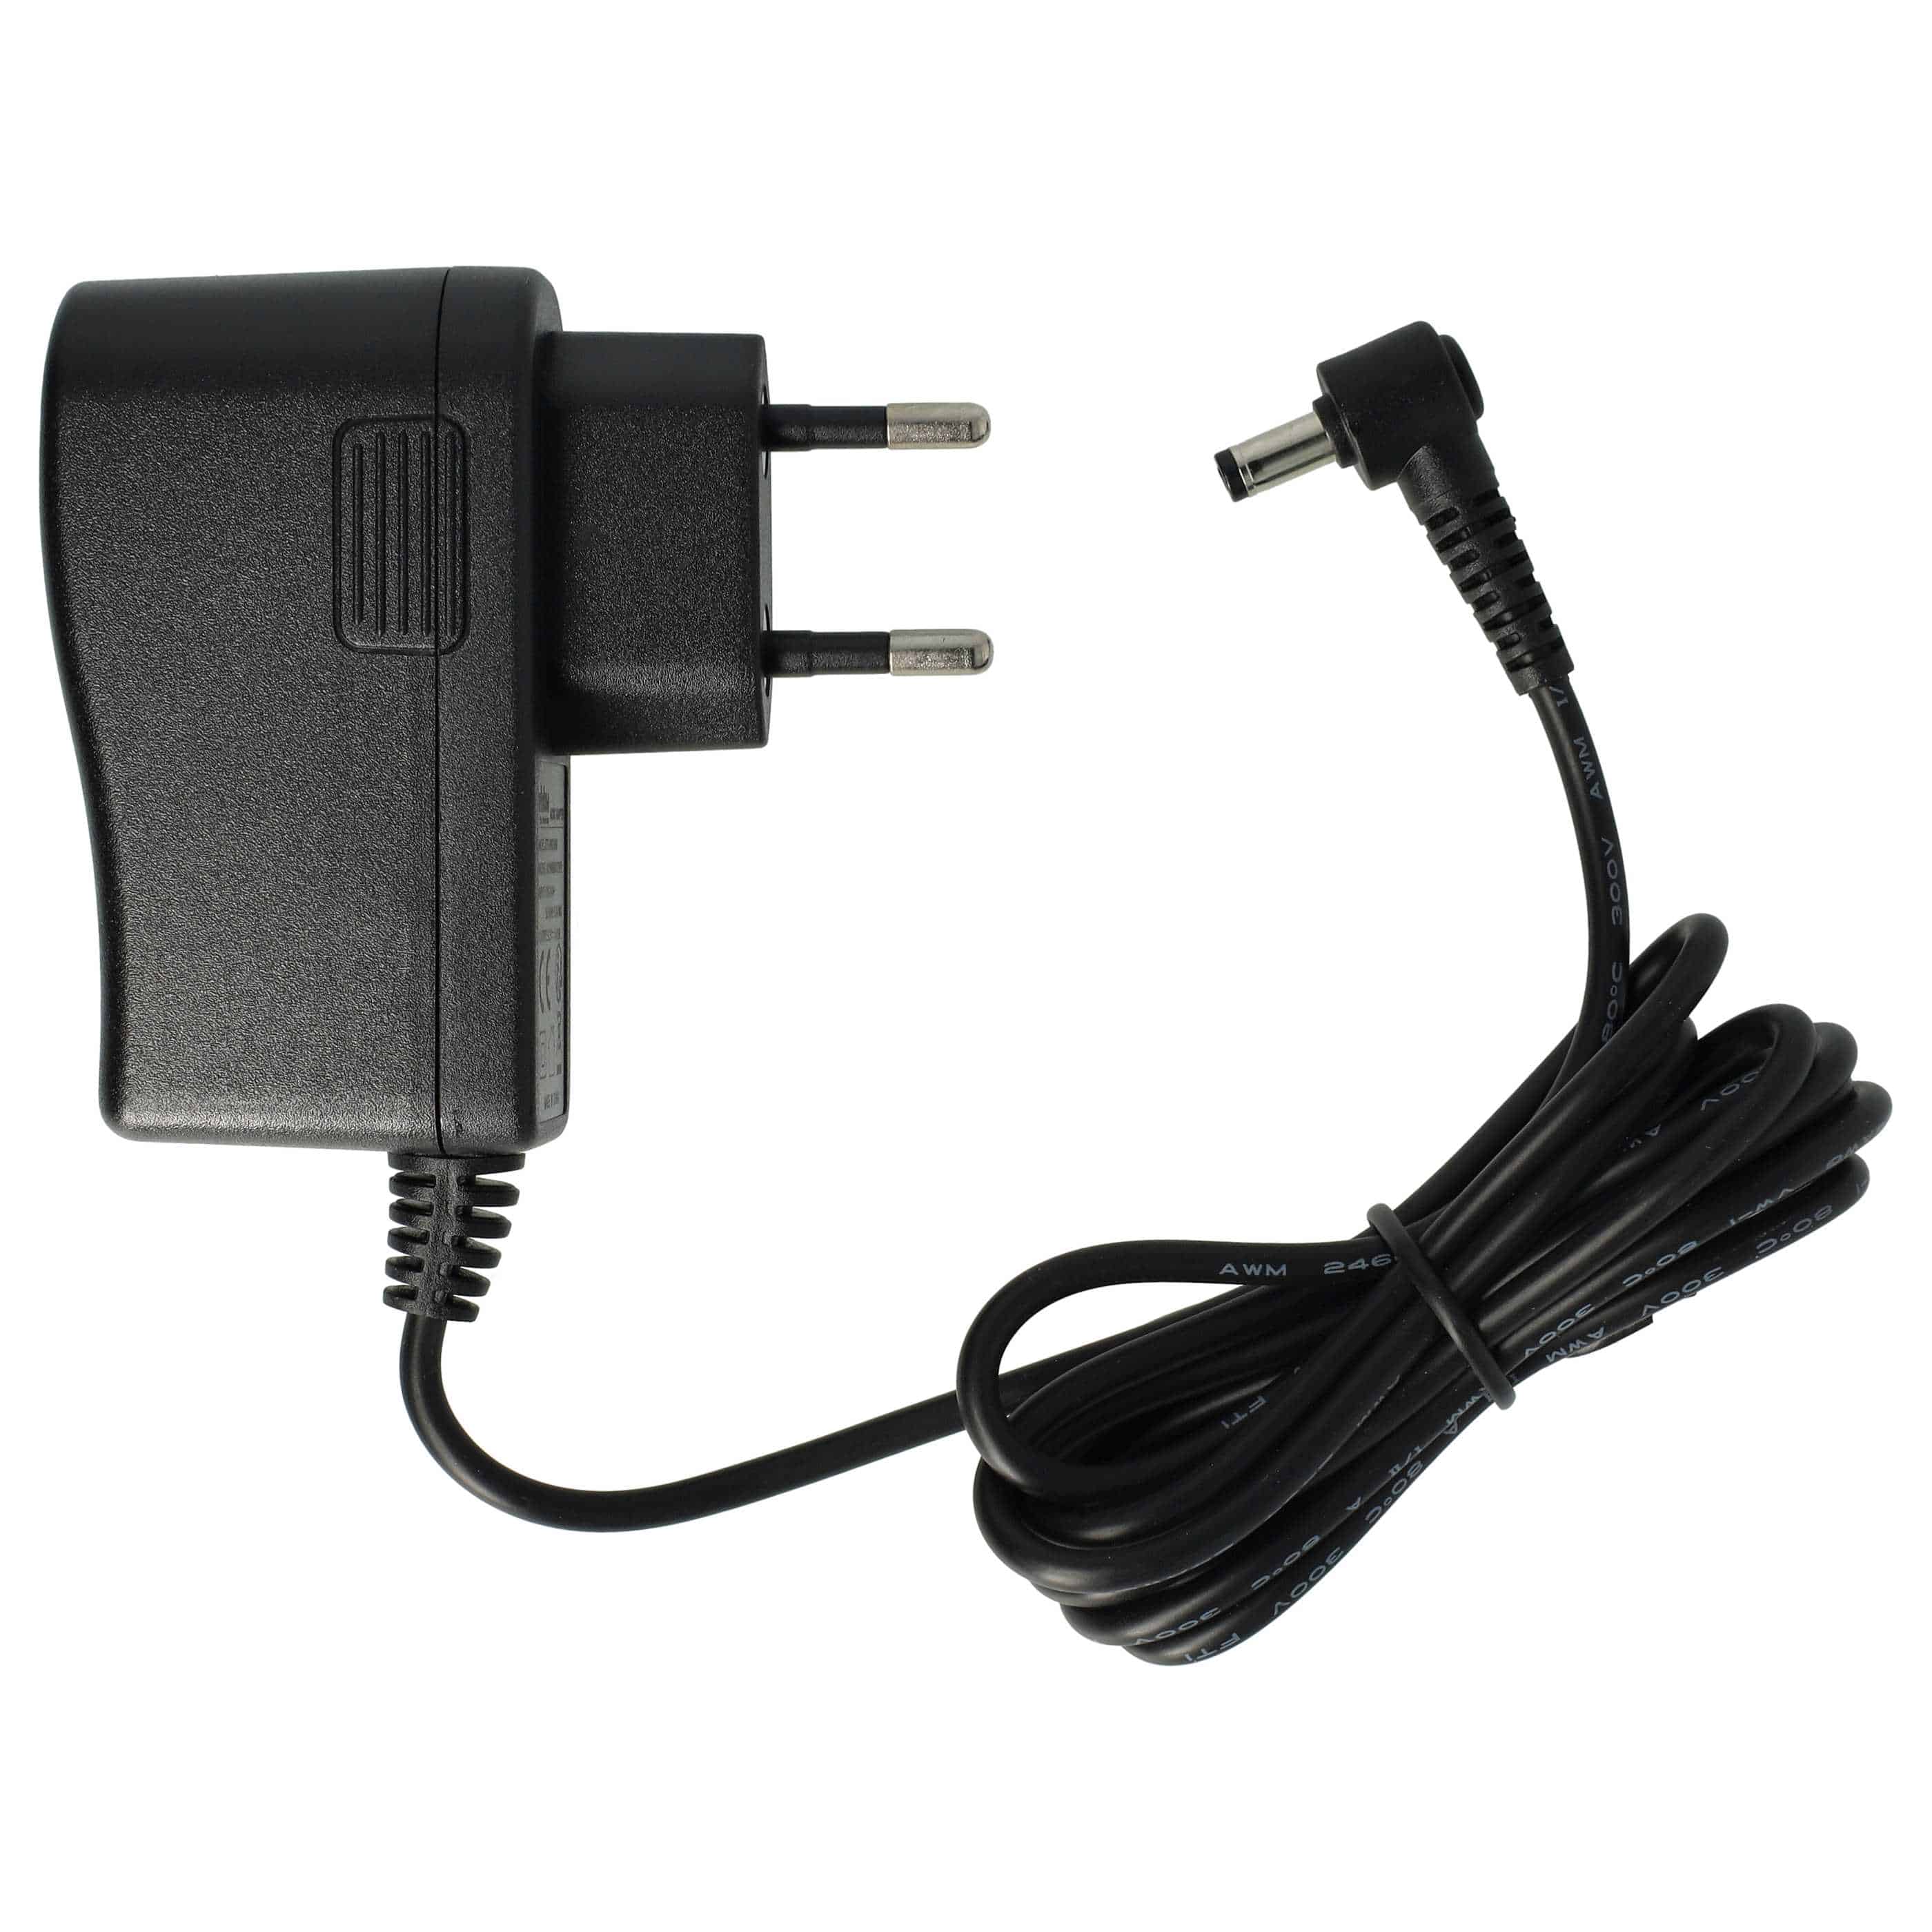 Mains Power Adapter replaces Casio AD-E95100LG for Casio Keyboard, E-Piano - 114 cm